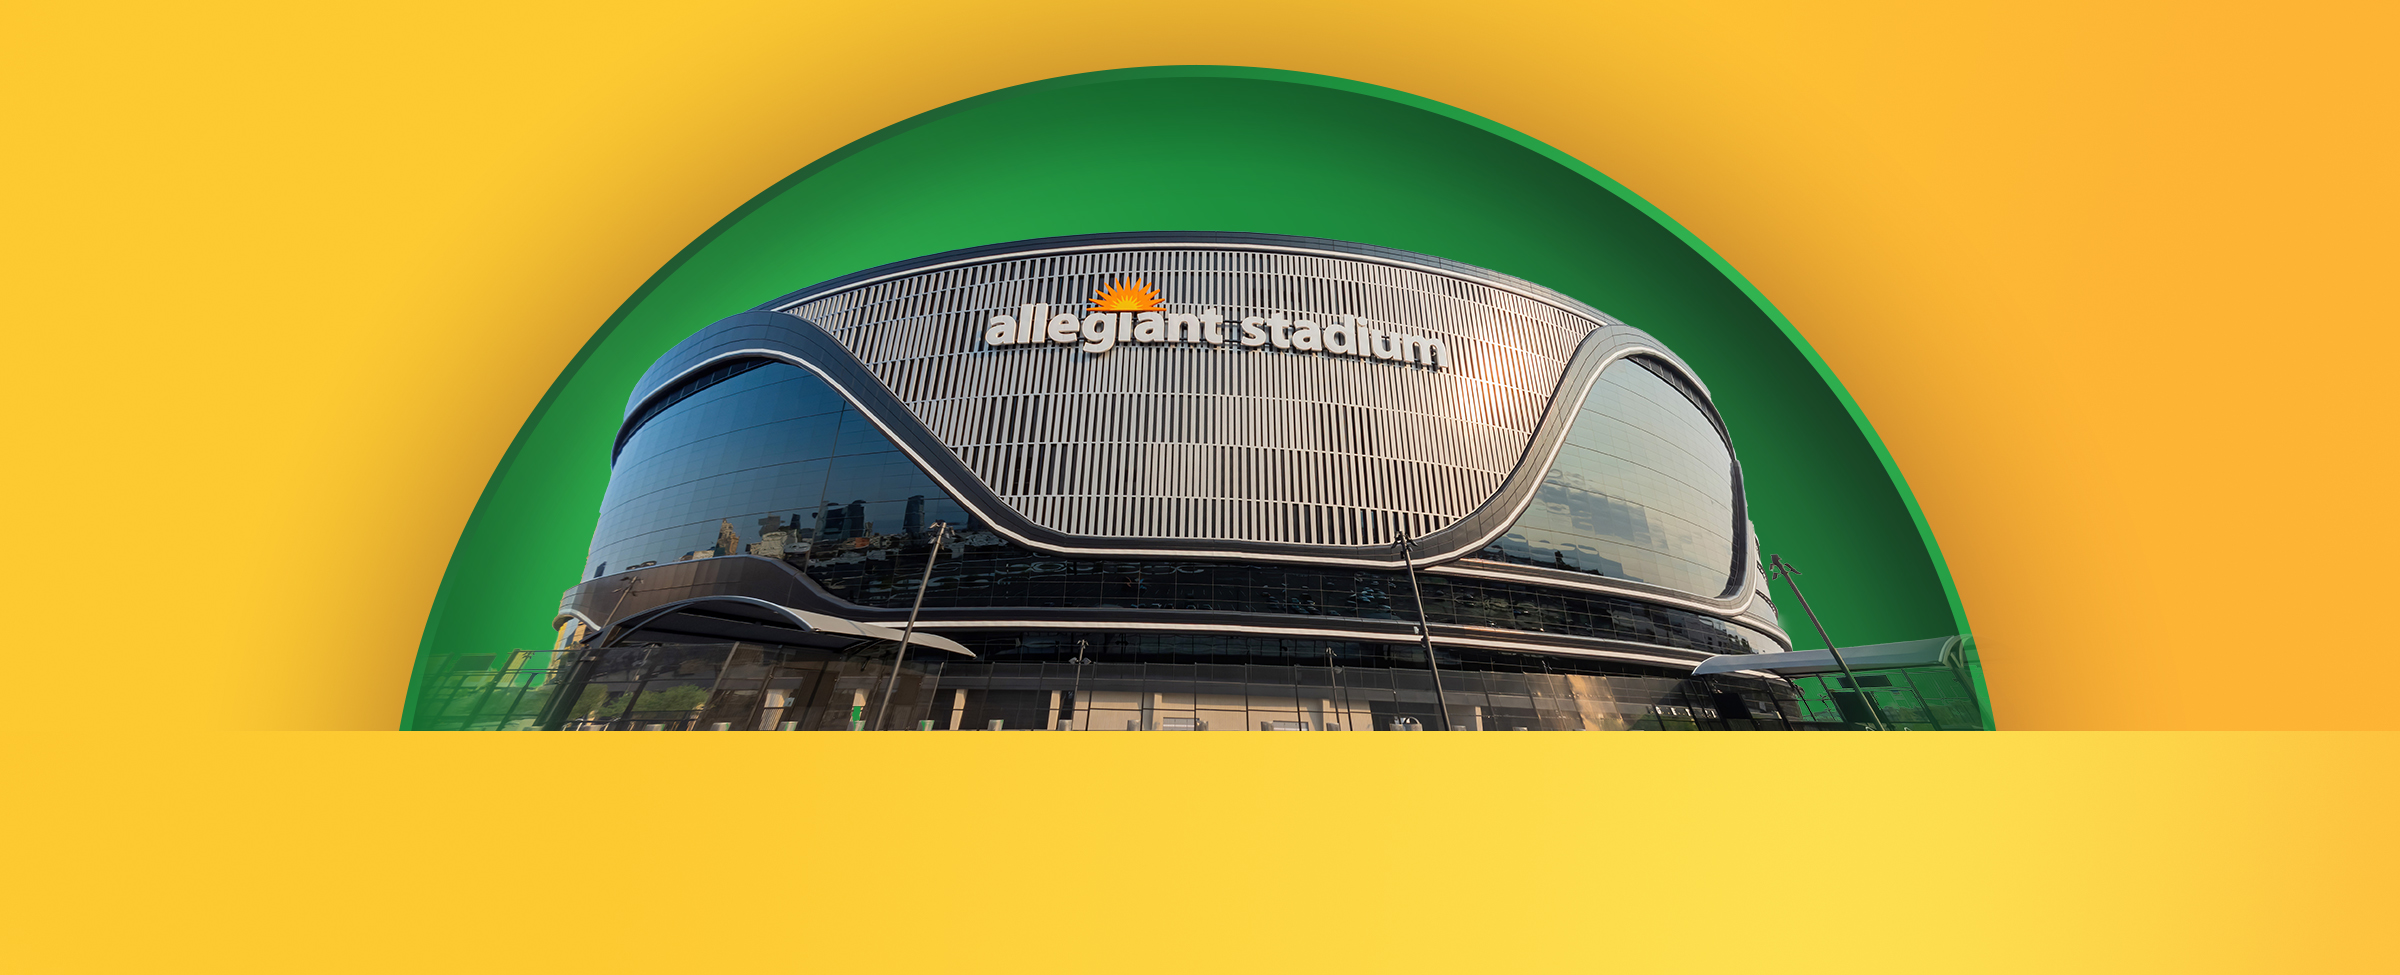 An image of Allegiant Stadium on a yellow background